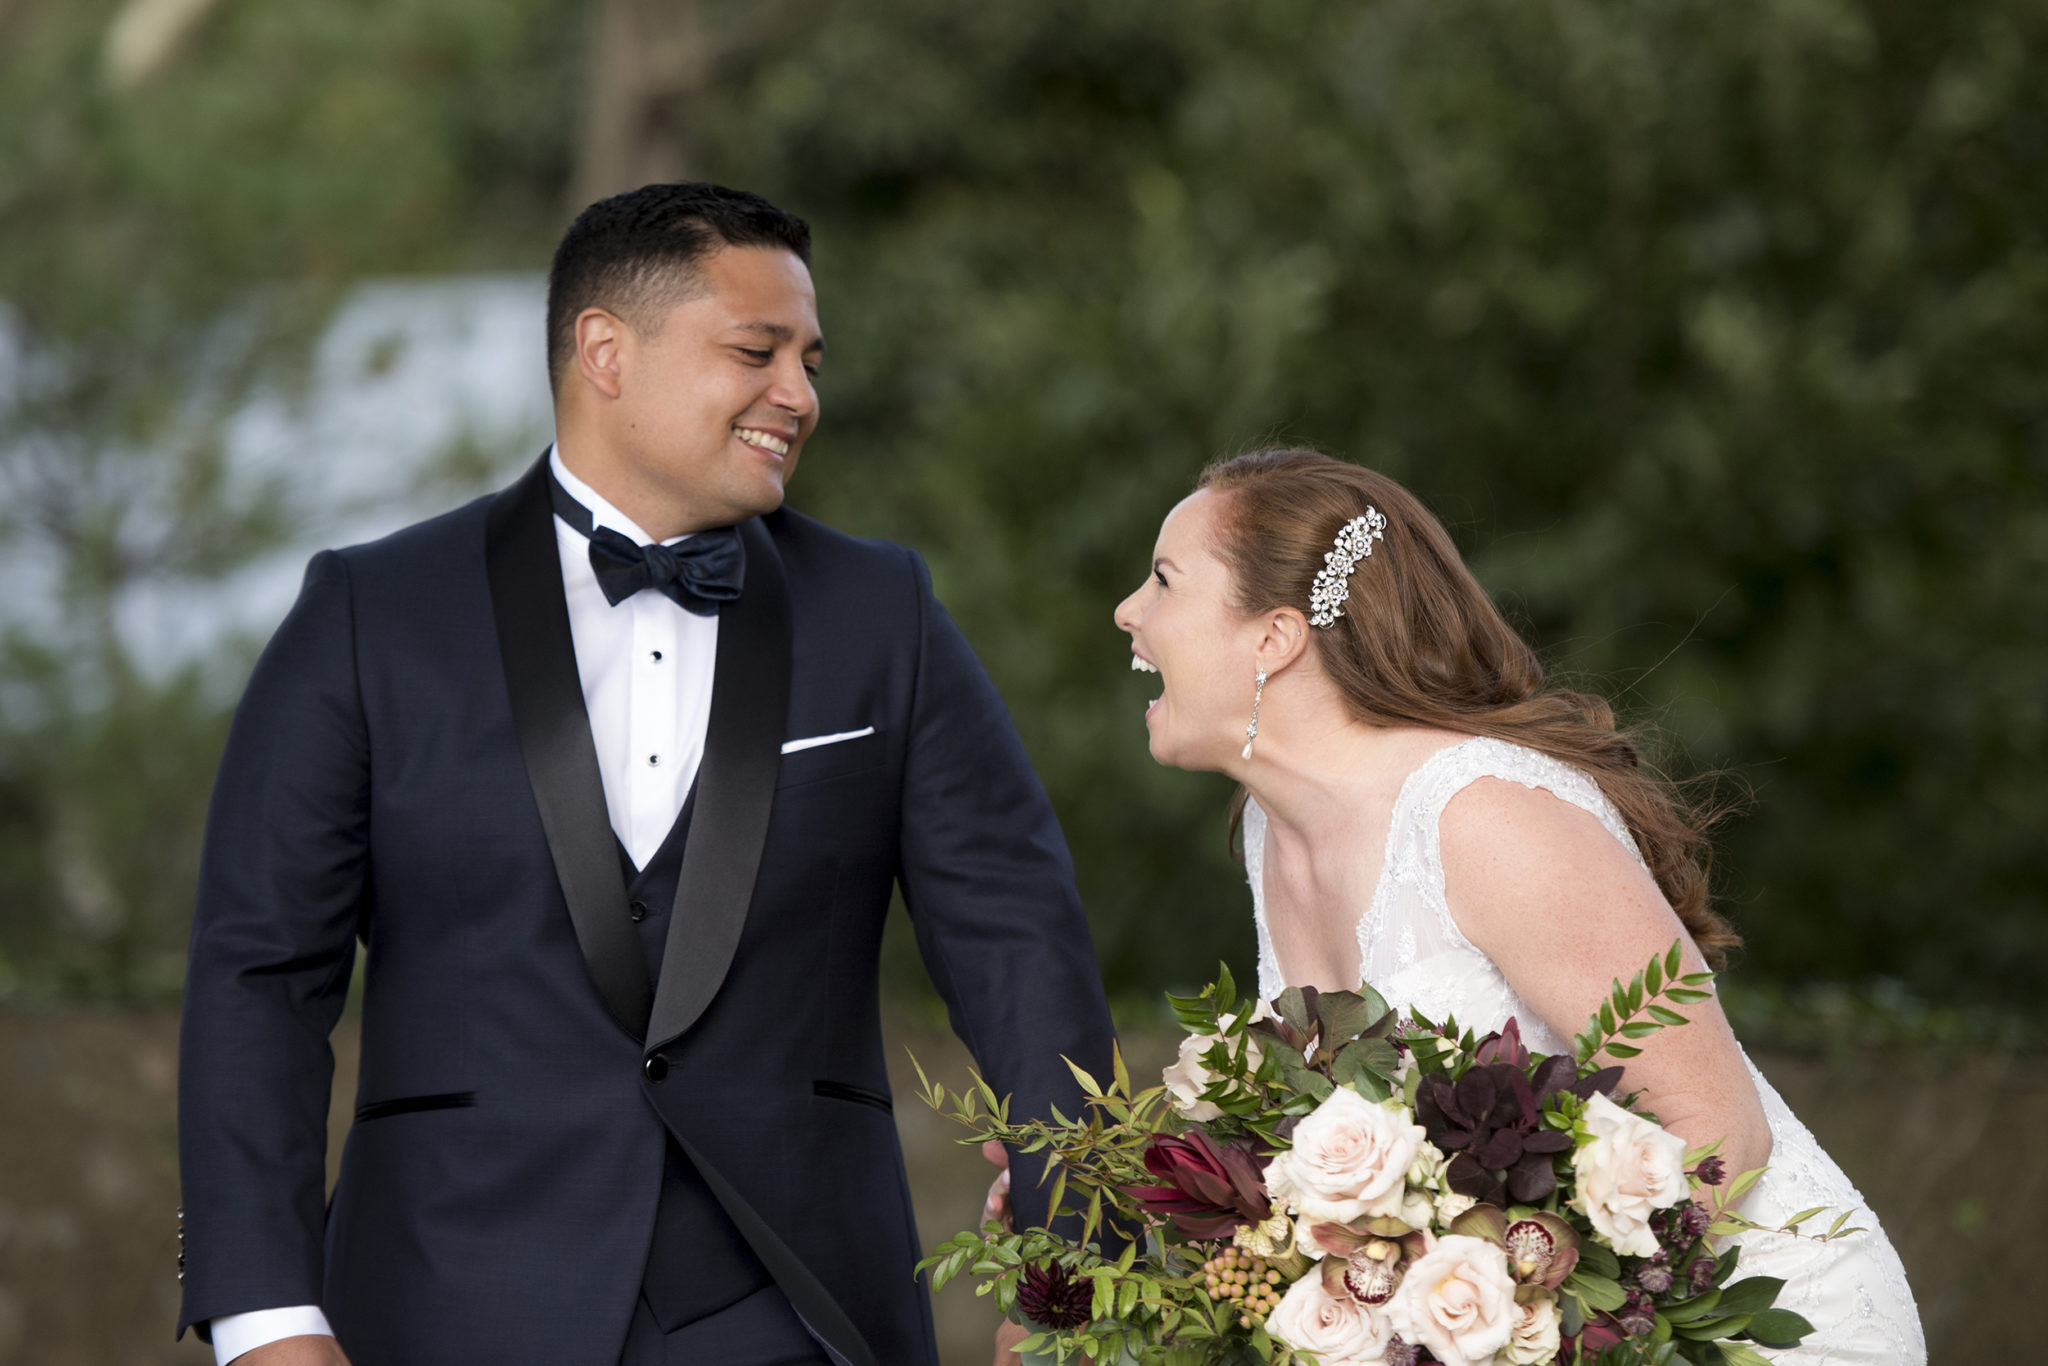 A woman in a white wedding dress and long auburn hair laughs while looking at and holding hands with a groom in a black tux who smiles back